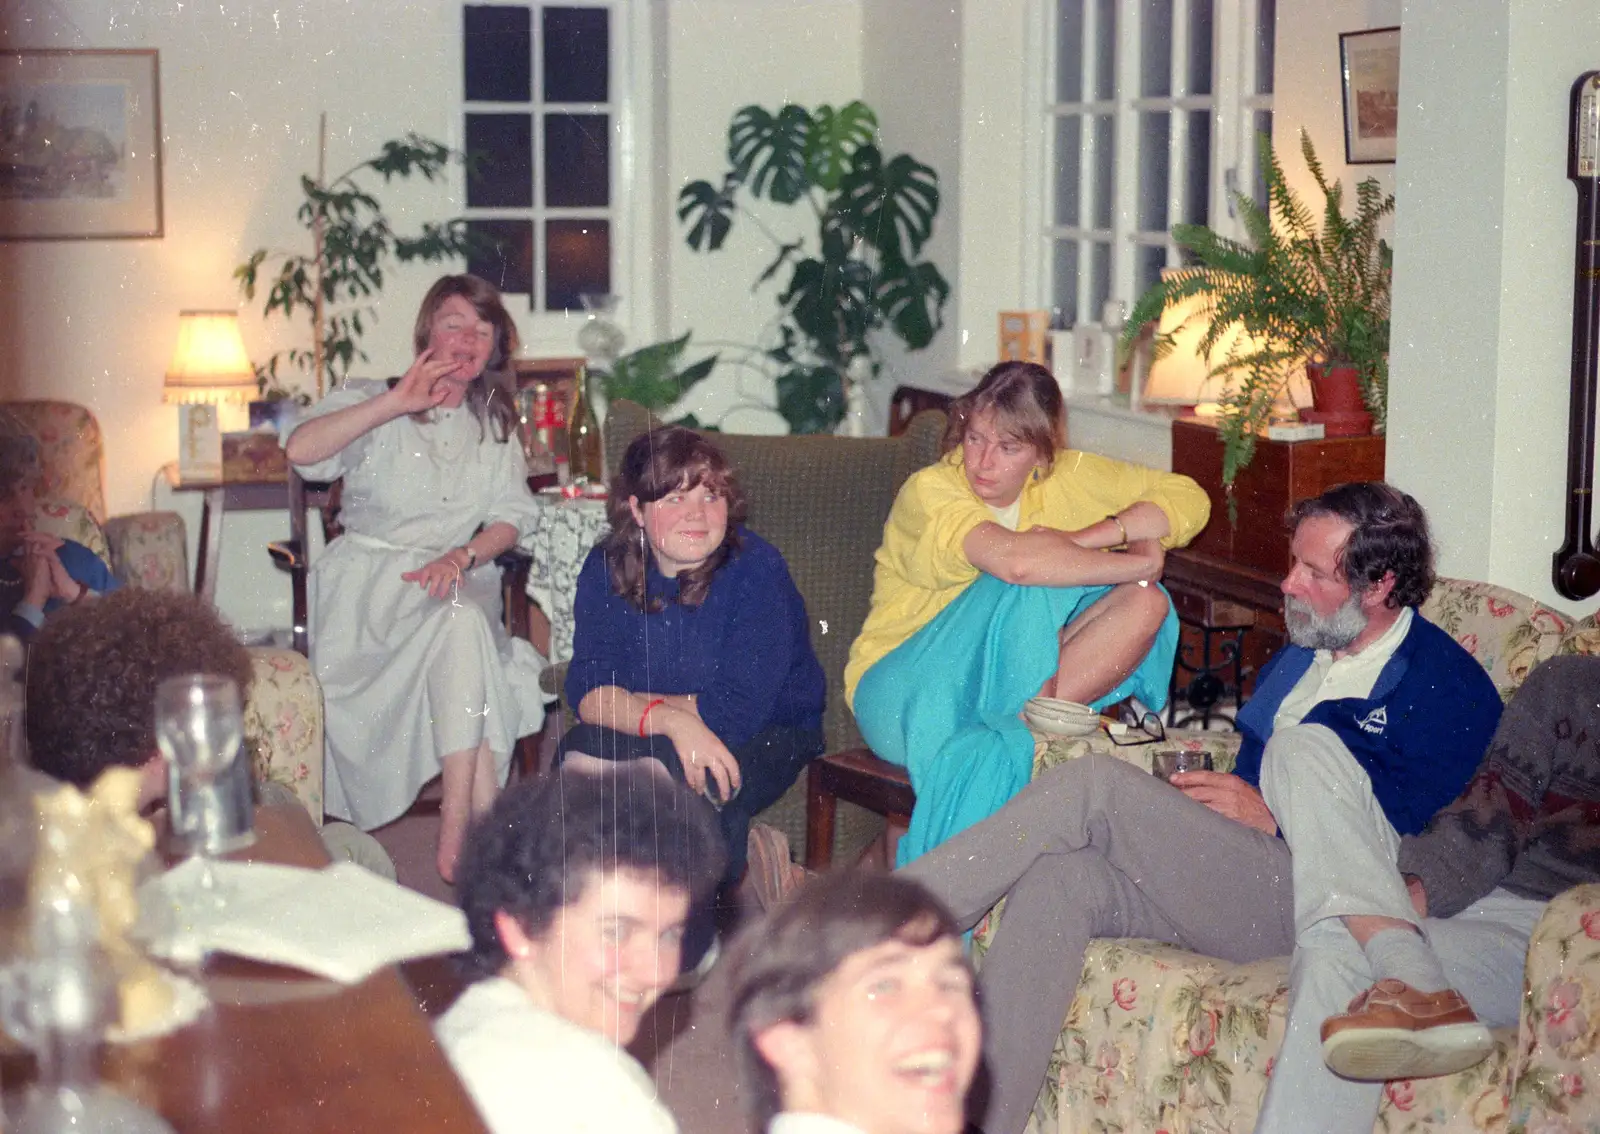 Mother, Sis, Clare, Andy, Liz and Phil, from Nosher's 18th Birthday, Barton on Sea, Hampshire - 26th May 1985